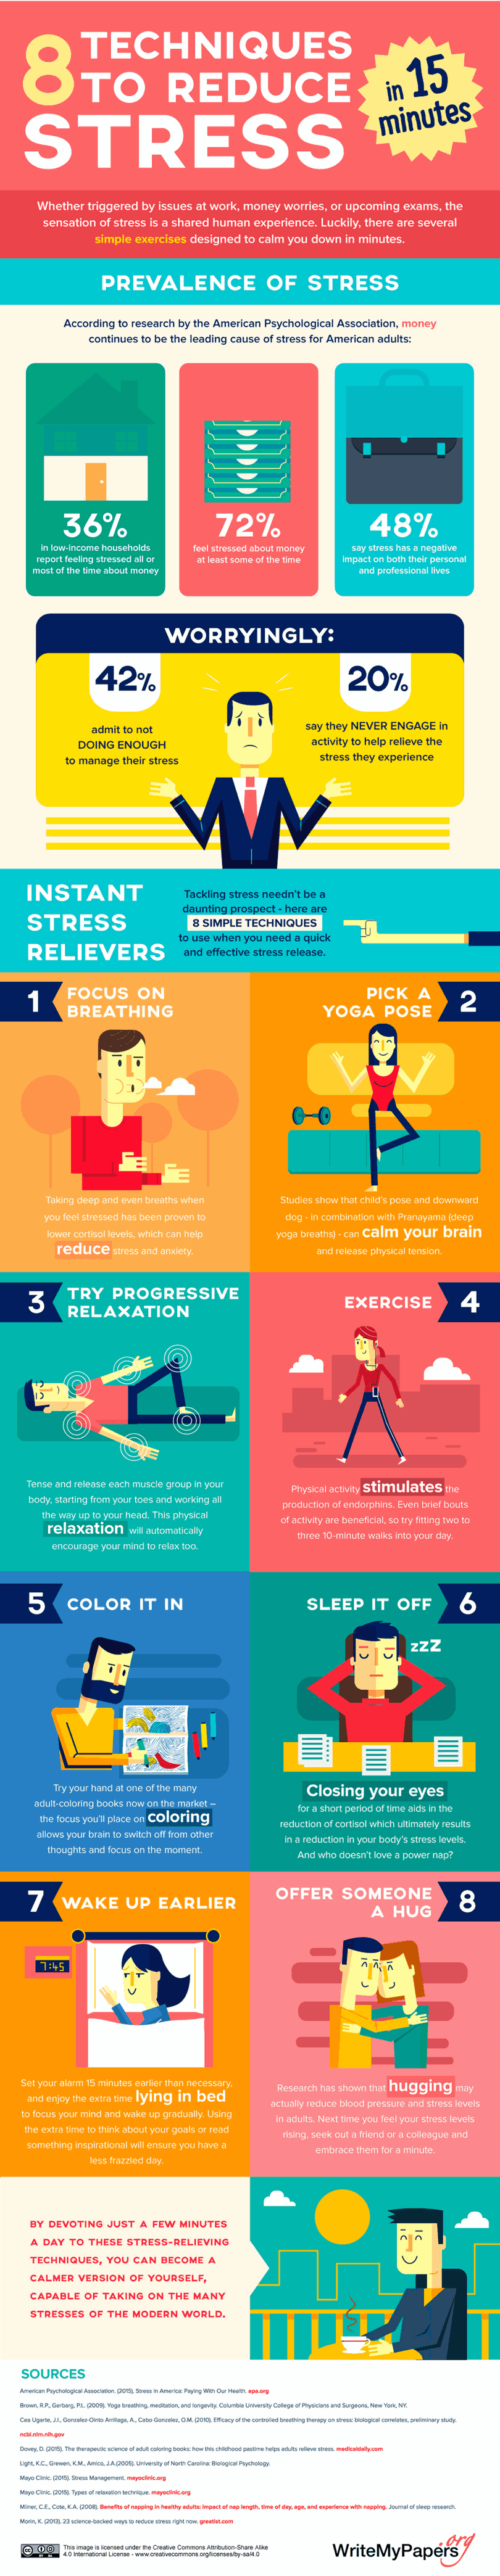 Techniques To Reduce Stress